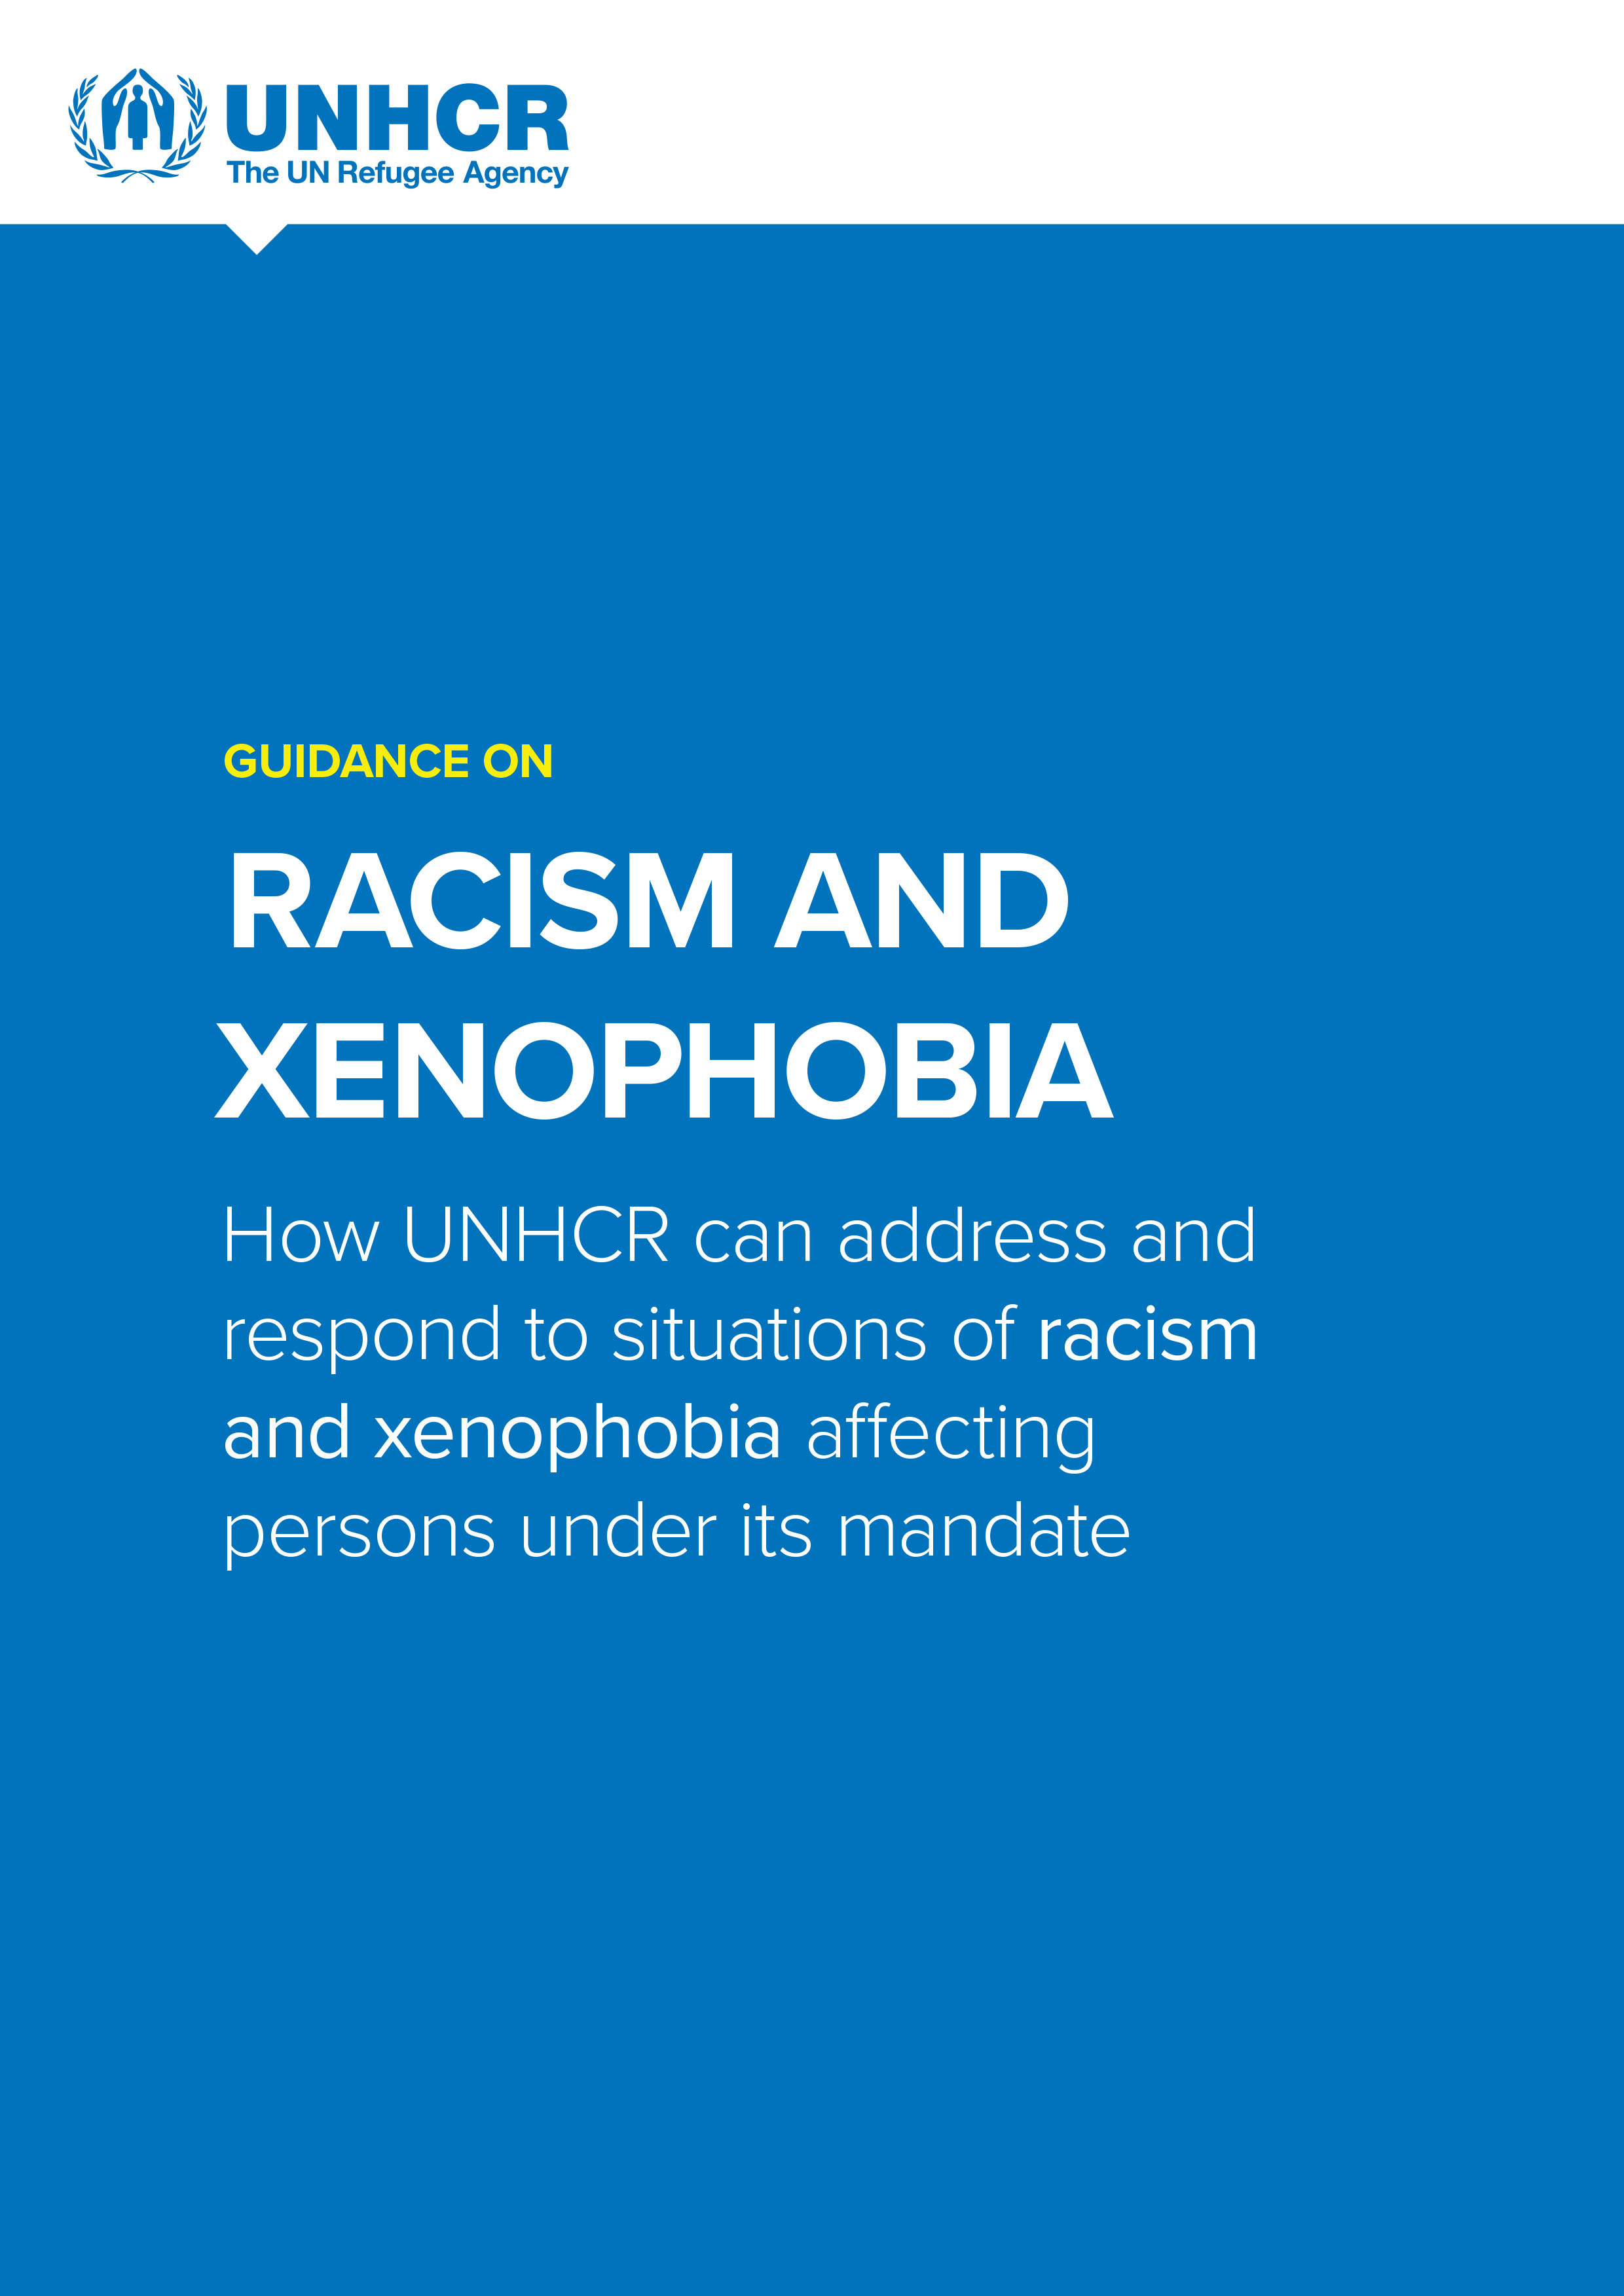 Guidance on Racism and Xenophobia How UNHCR Can Address and Respond to Situations of Racism and Xenophobia Affecting Persons Under Its Mandate